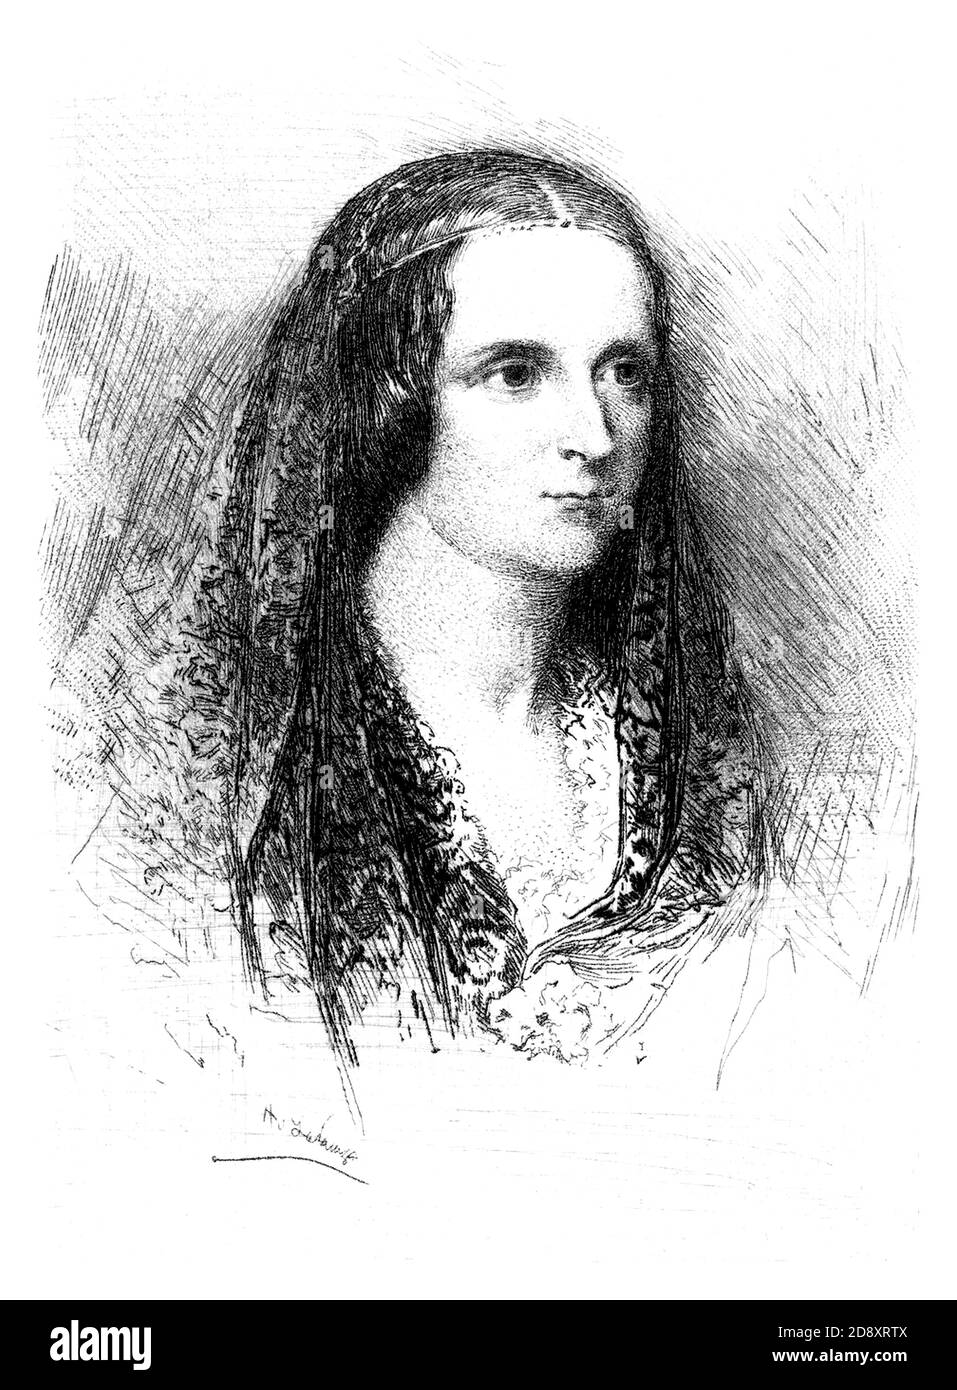 1840 ca , GREAT BRITAIN : The british writer MARY  SHELLEY Wollstonecraft ( 1797 – 1851  ), author of FRANKENSTEIN . Illustration engraved from unknown engraver, pubblished in late XIX century . Mary Shelley was the wife of celebrated Romantic poet Percy Bysshe SHELLEY ( 1792 - 1822 ) and friend of Lord GEORGE GORDON BYRON ( 1788 - 1824 ) .  - SCRITTORE - LETTERATURA - LITERATURE - letterato - SCRITTORE - SCRITTRICE - LETTERATURA - LITERATURE  - portrait - ritratto  -  TEATRO - THEATRE - engraved - incisione -  illustrazione - illustration  - ROMANTICISMO - Romanticism  - HORROR - GOTICO - GOT Stock Photo